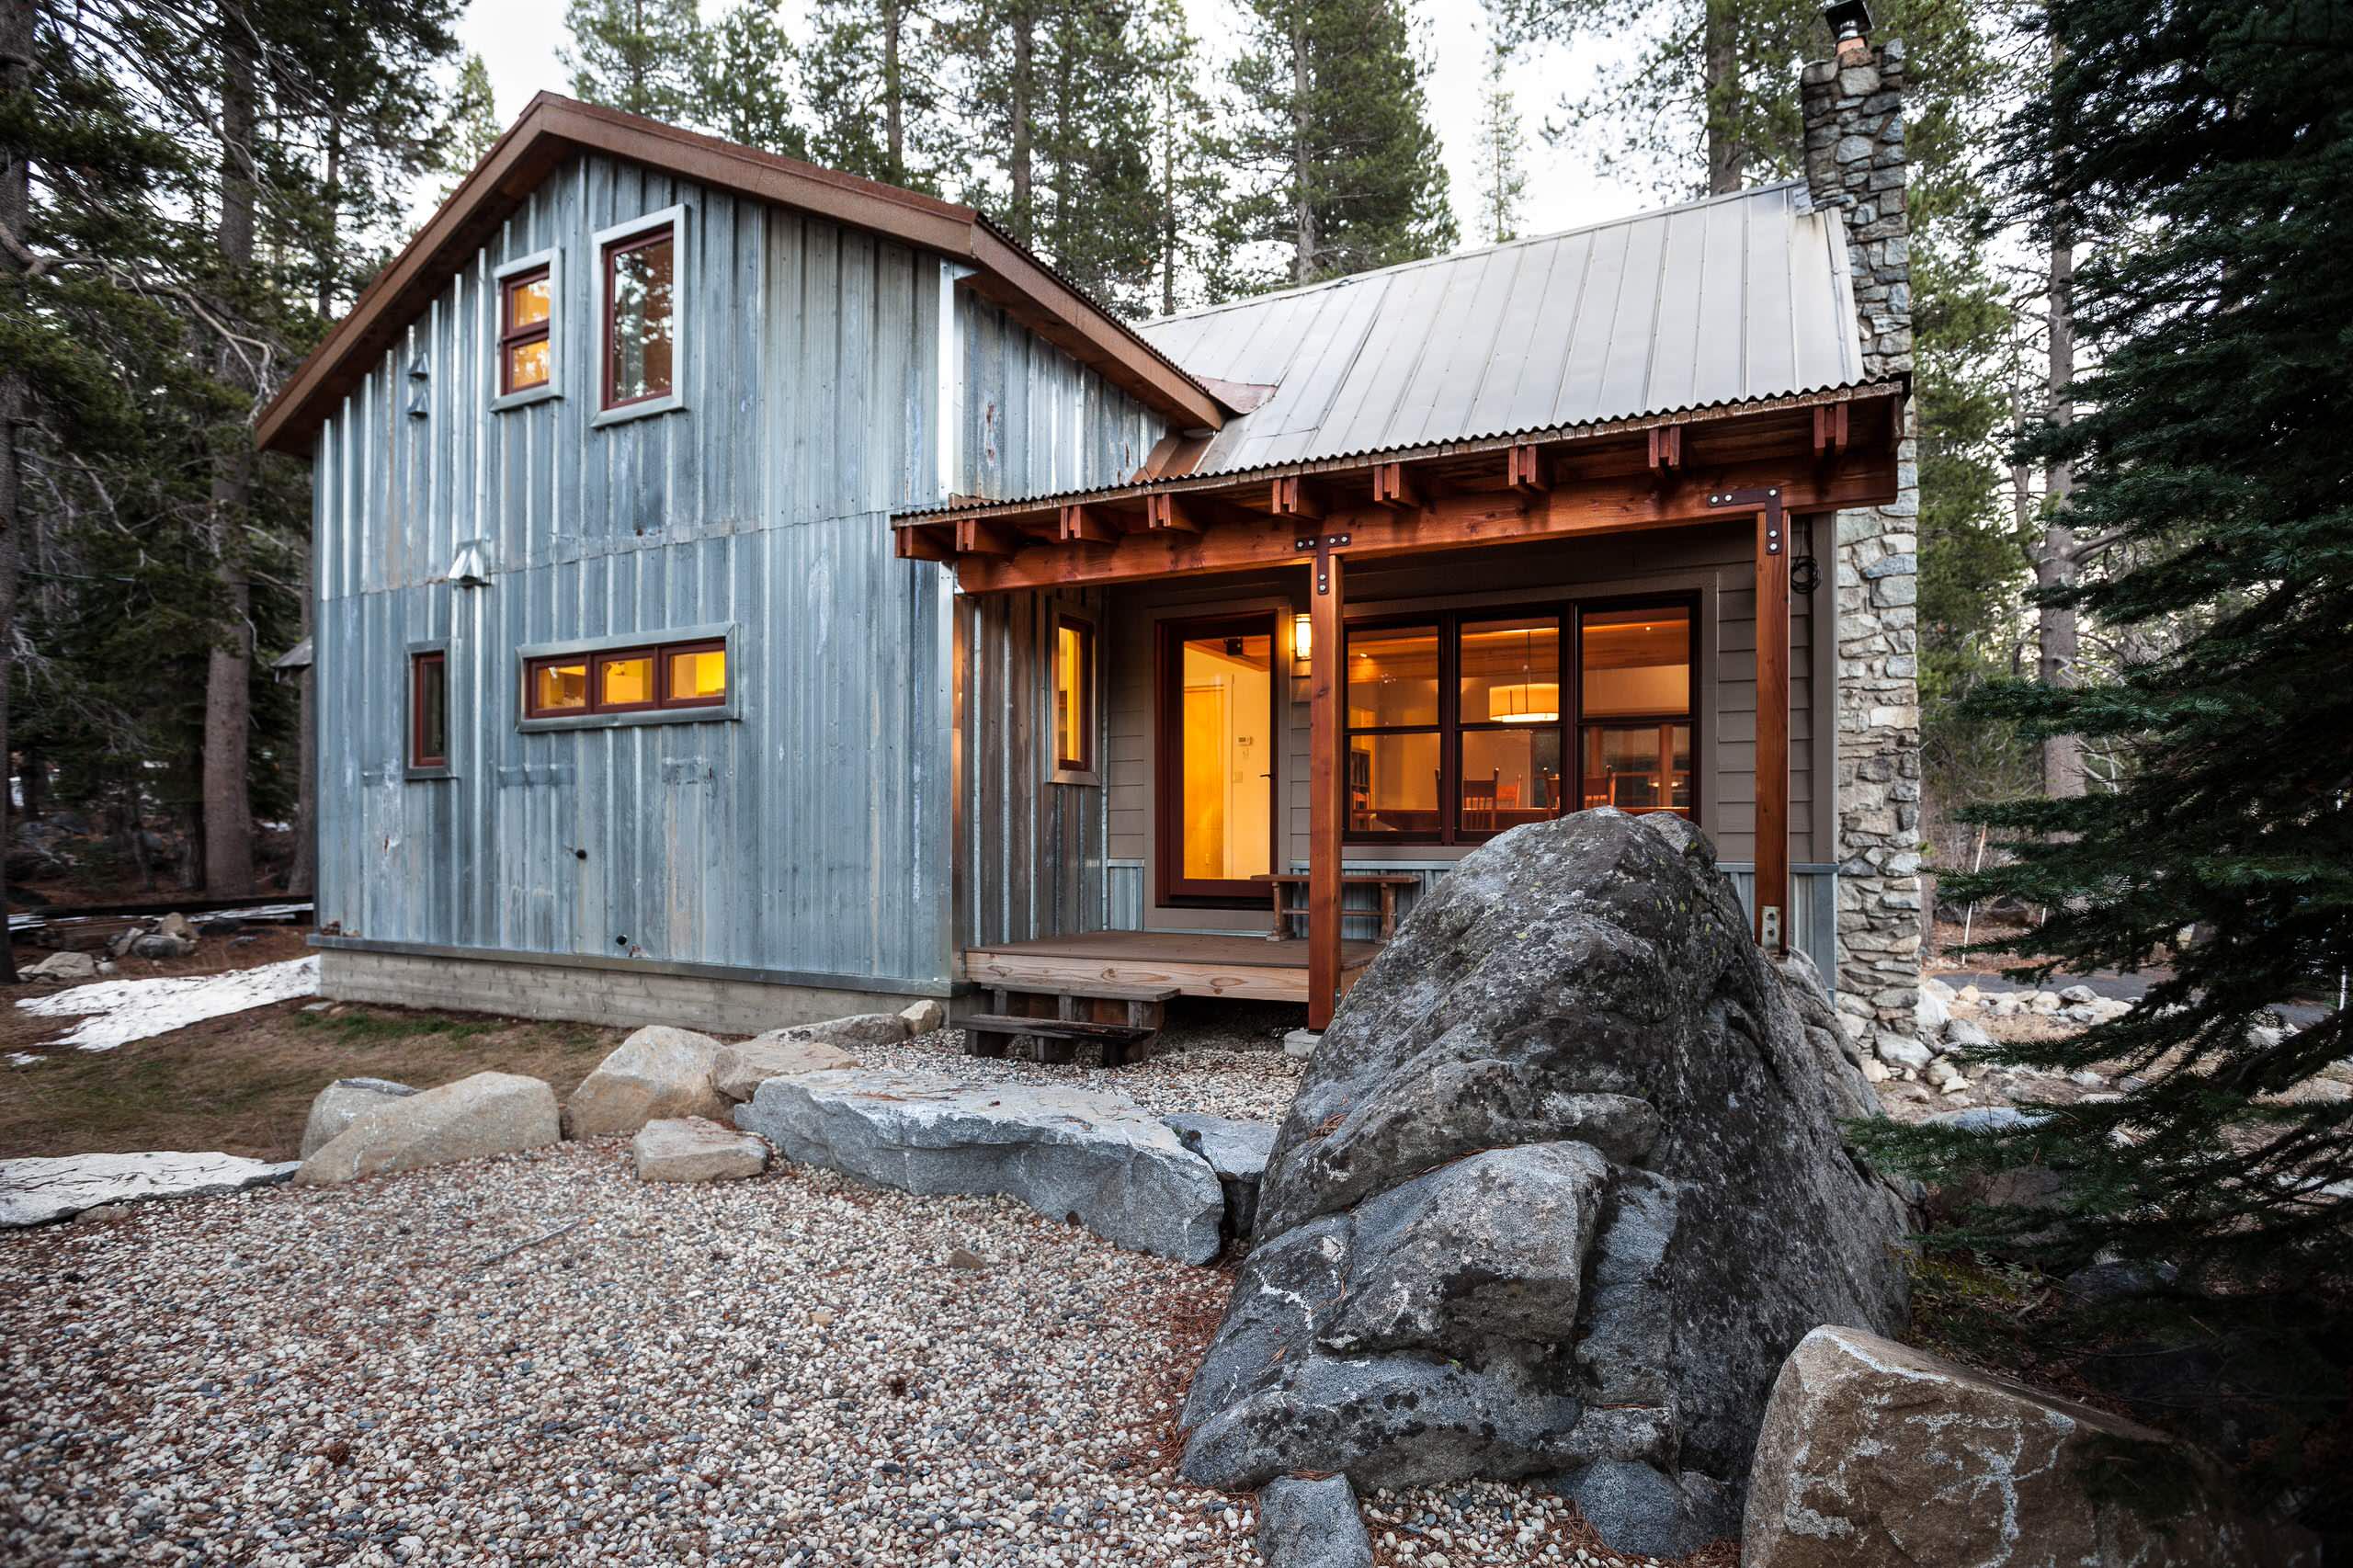 75 Rustic Metal Exterior Home Ideas You'll Love - June, 2022 | Houzz